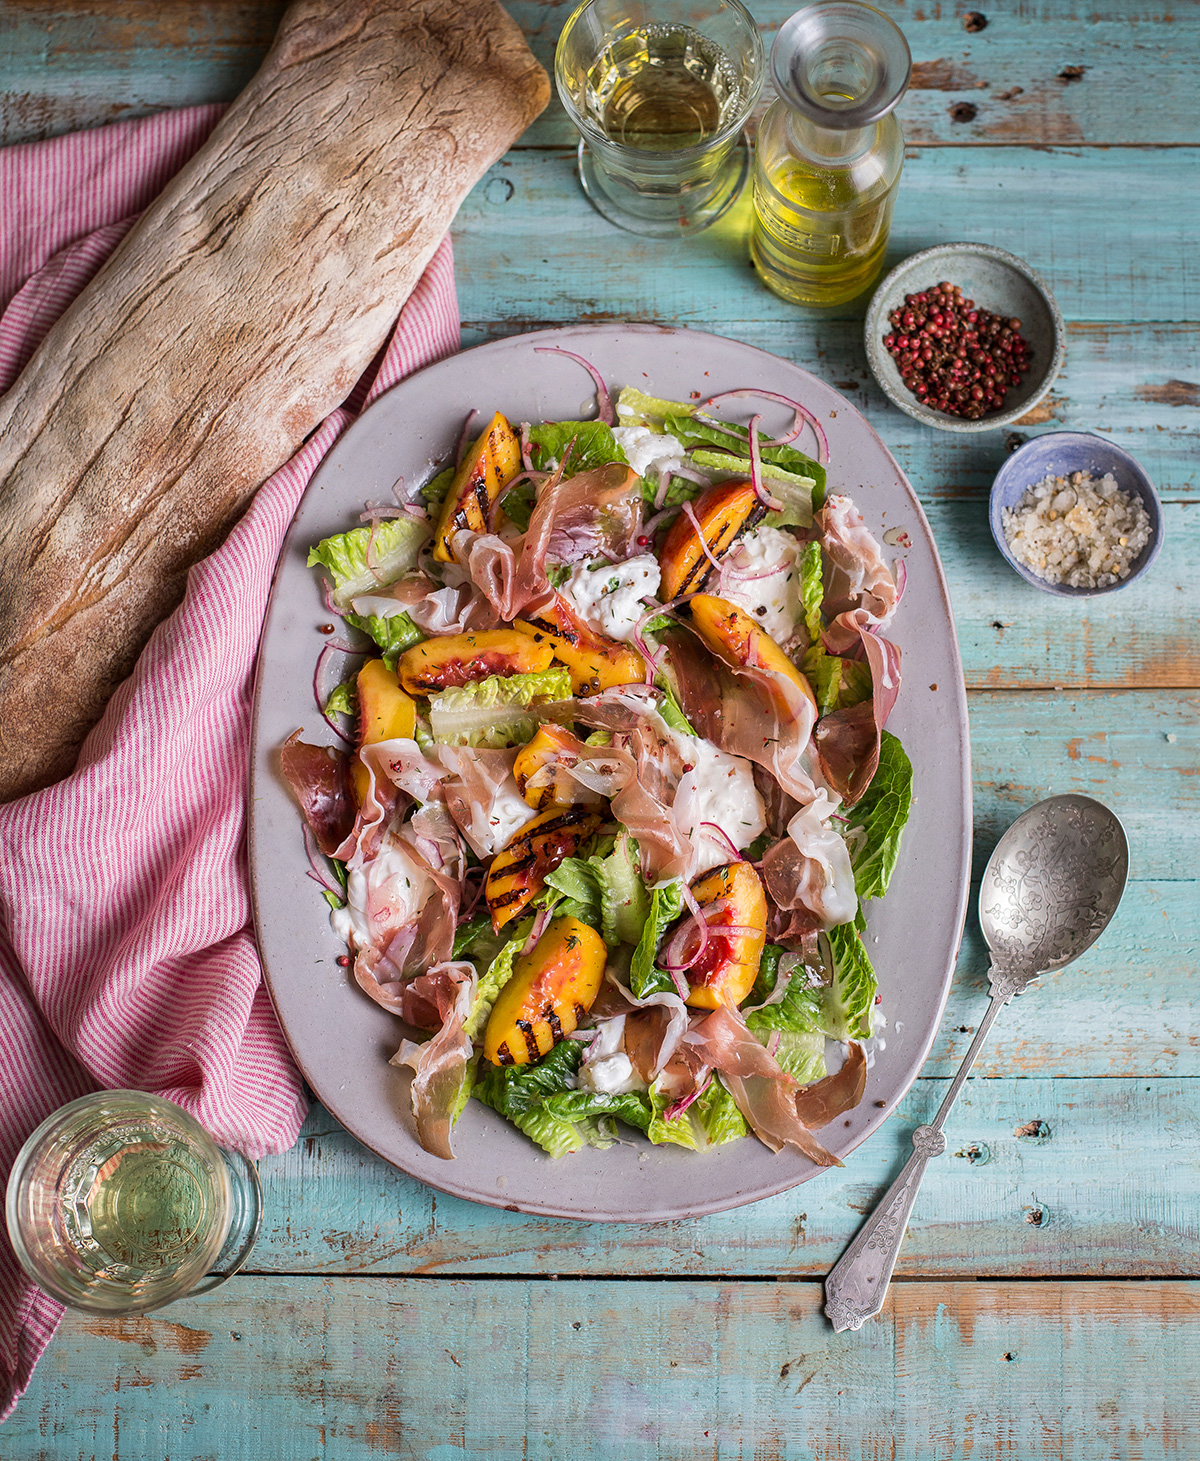 Jamie Oliver's grilled apricot salad with mozzarella, pink peppercorns & prosciutto